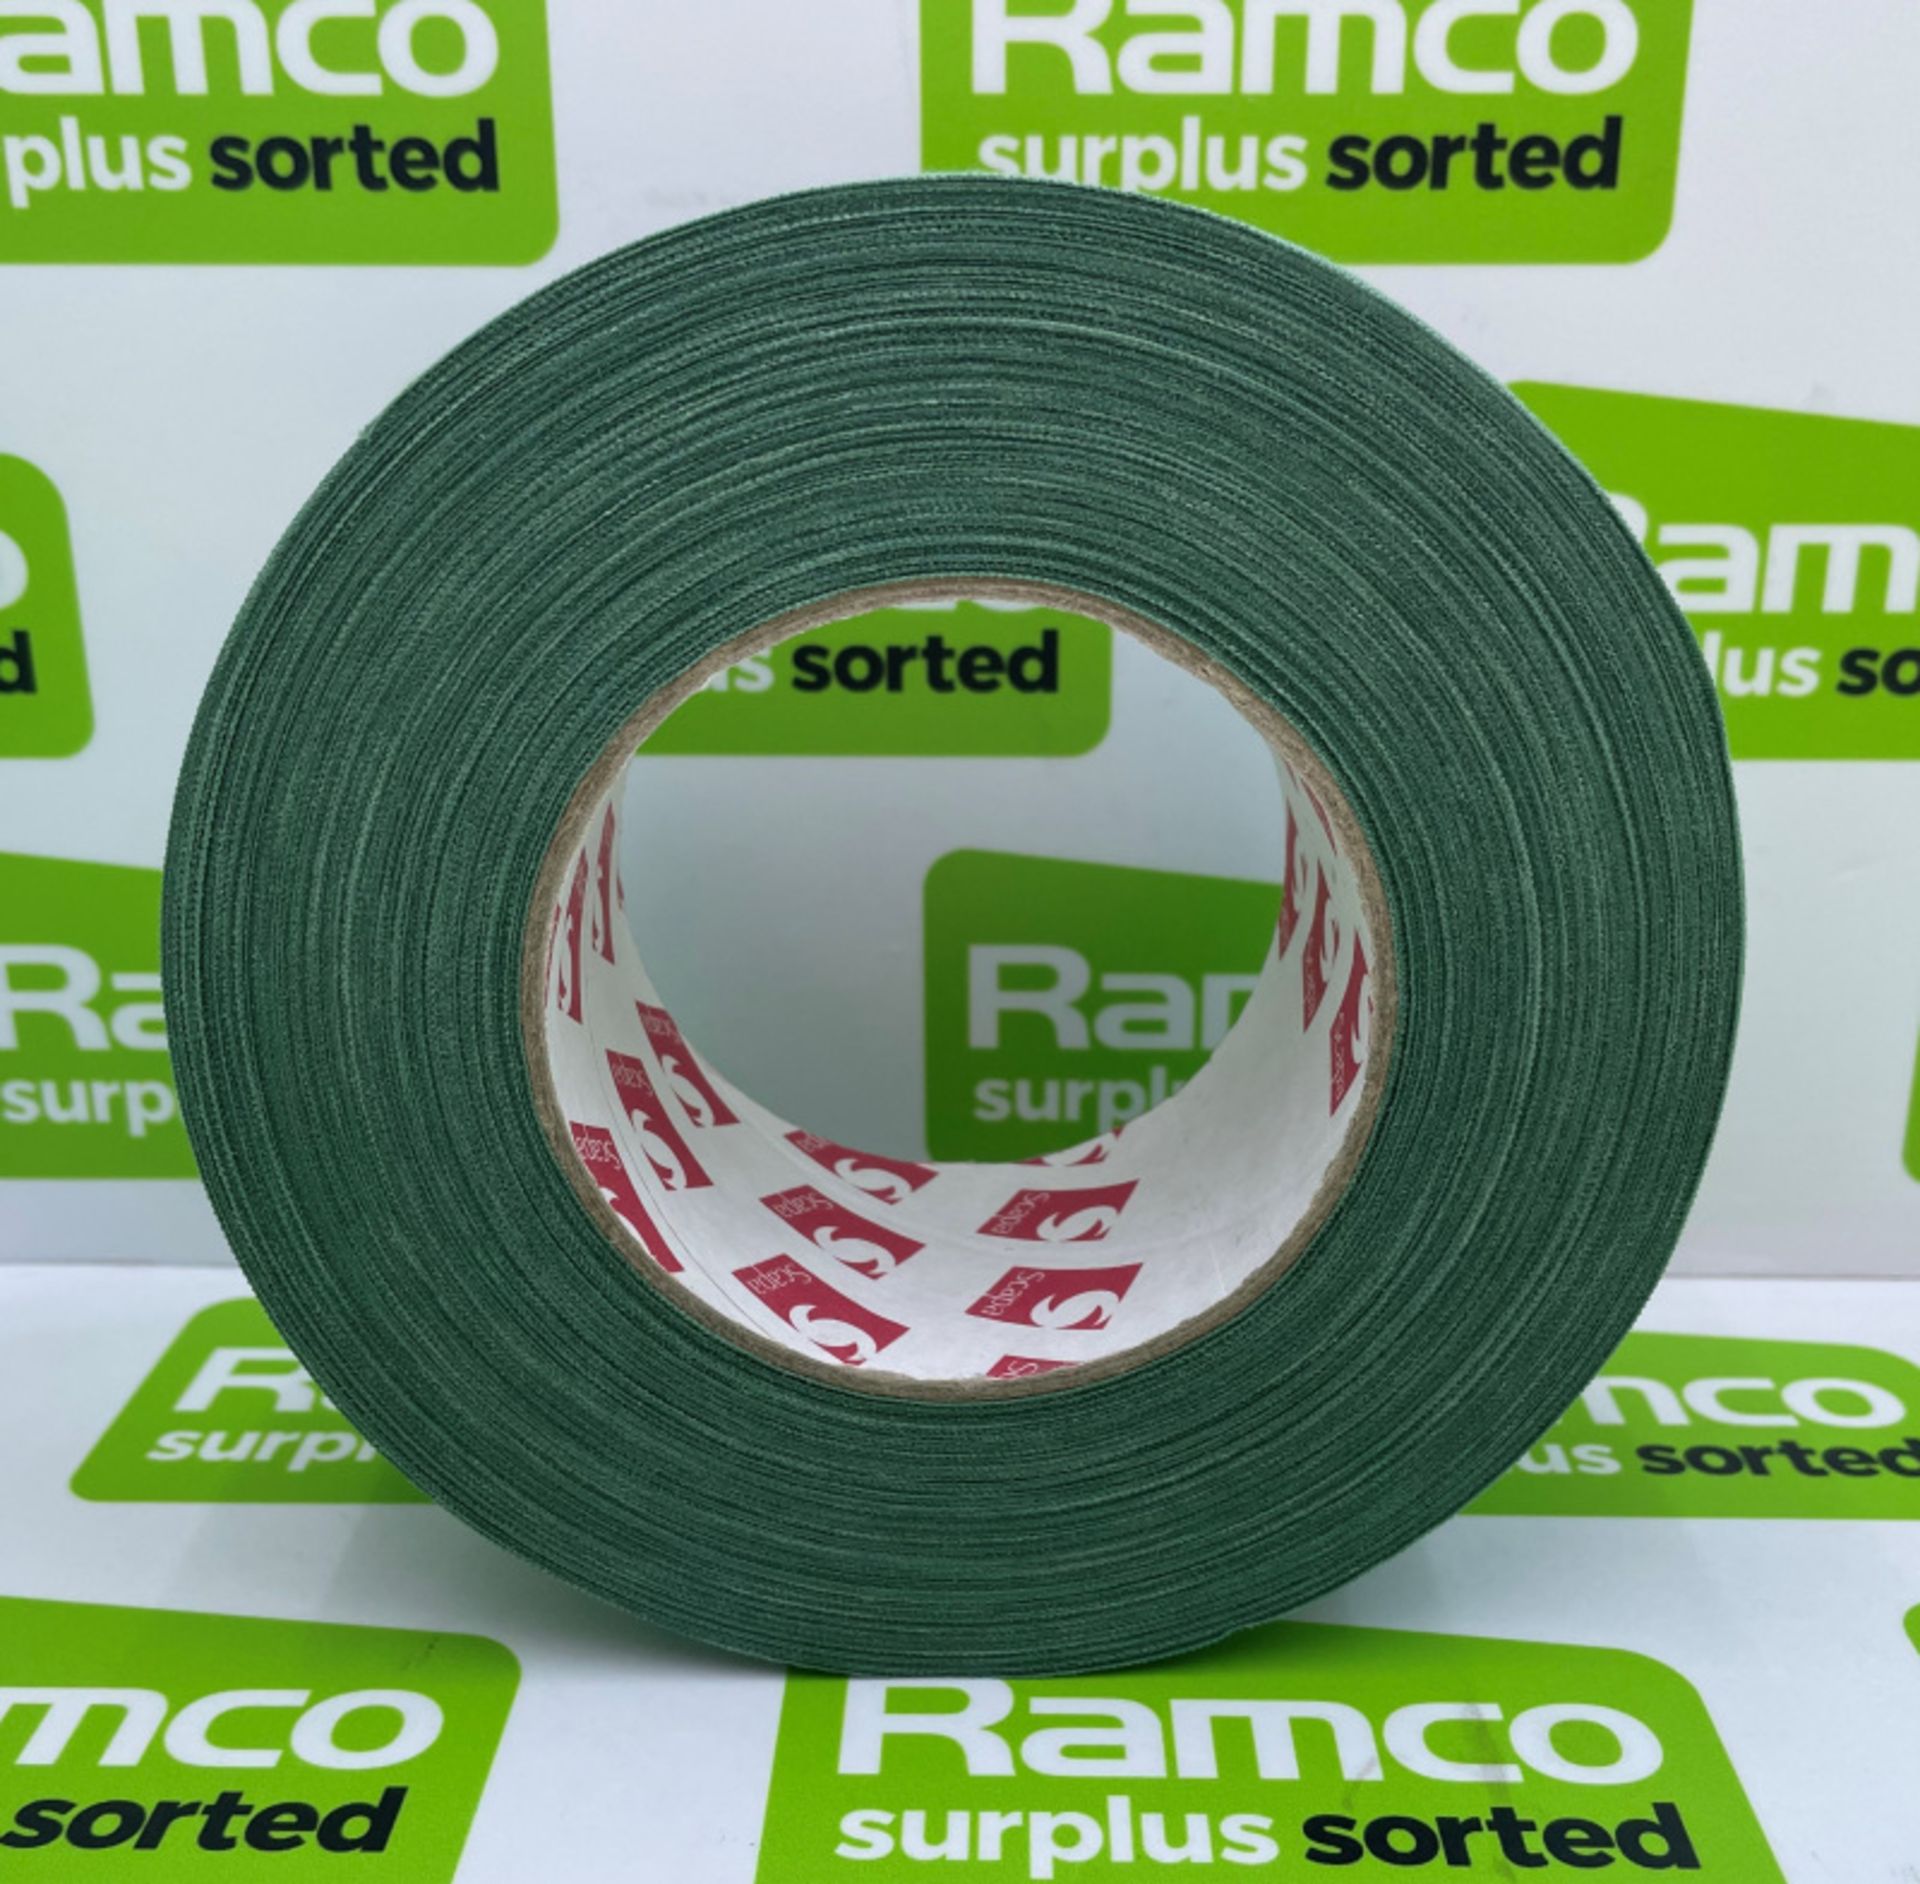 Scapa 3302 Pro Tape - Olive Green - 50mm x 50M rolls - 16 rolls per box - 33 boxes - Image 3 of 5